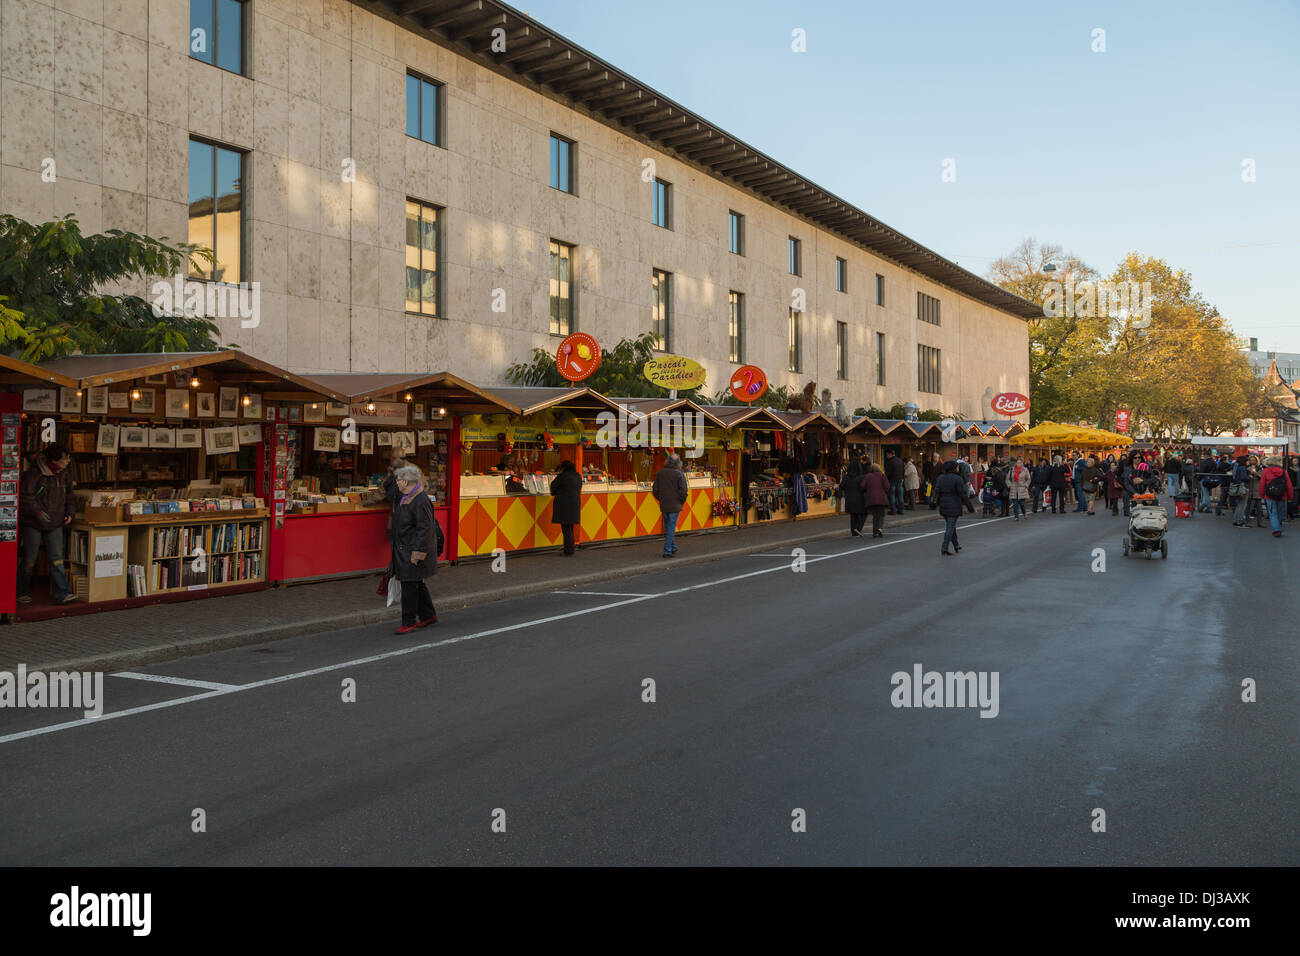 A photograph of the markets at Petersplatz in Basel, Switzerland. Markets are held here for the Autumn Fair and Christmas Stock Photo